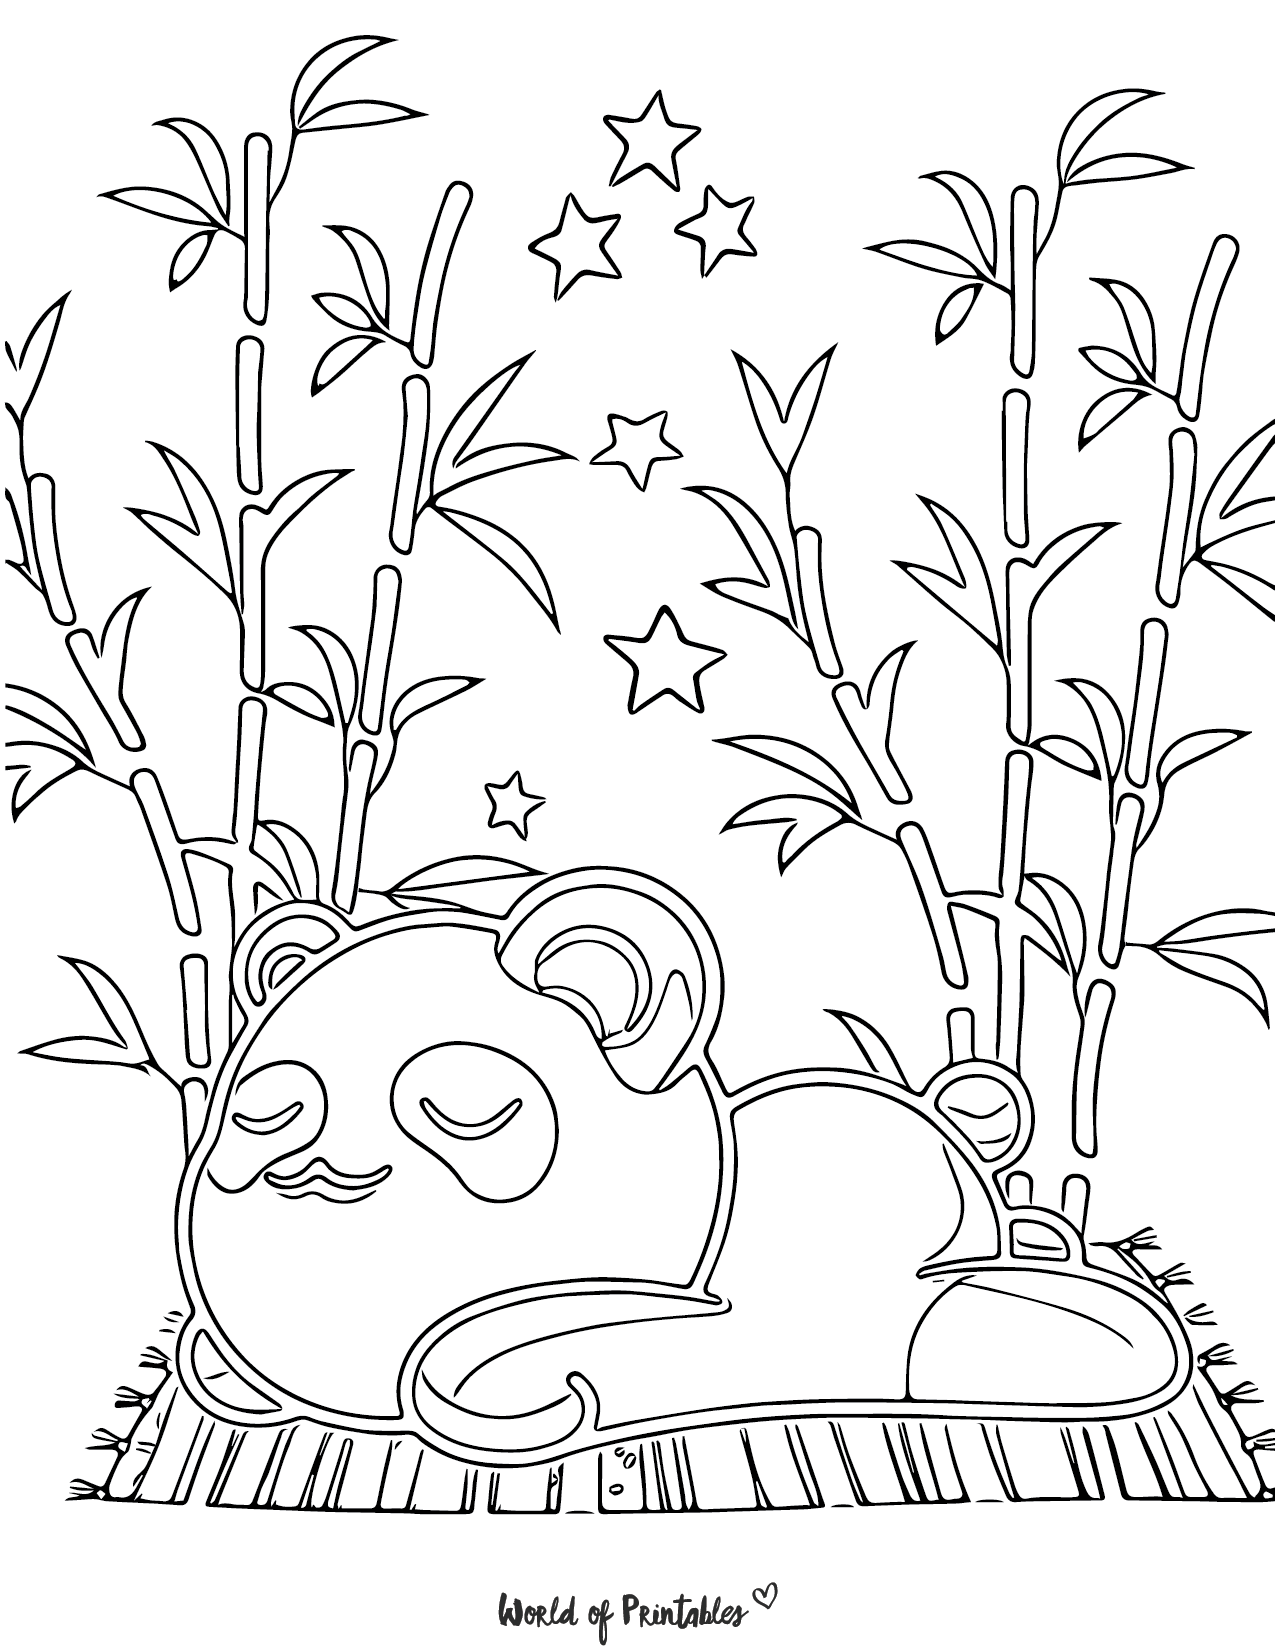 Cute Animal Coloring Pages - World of Printables